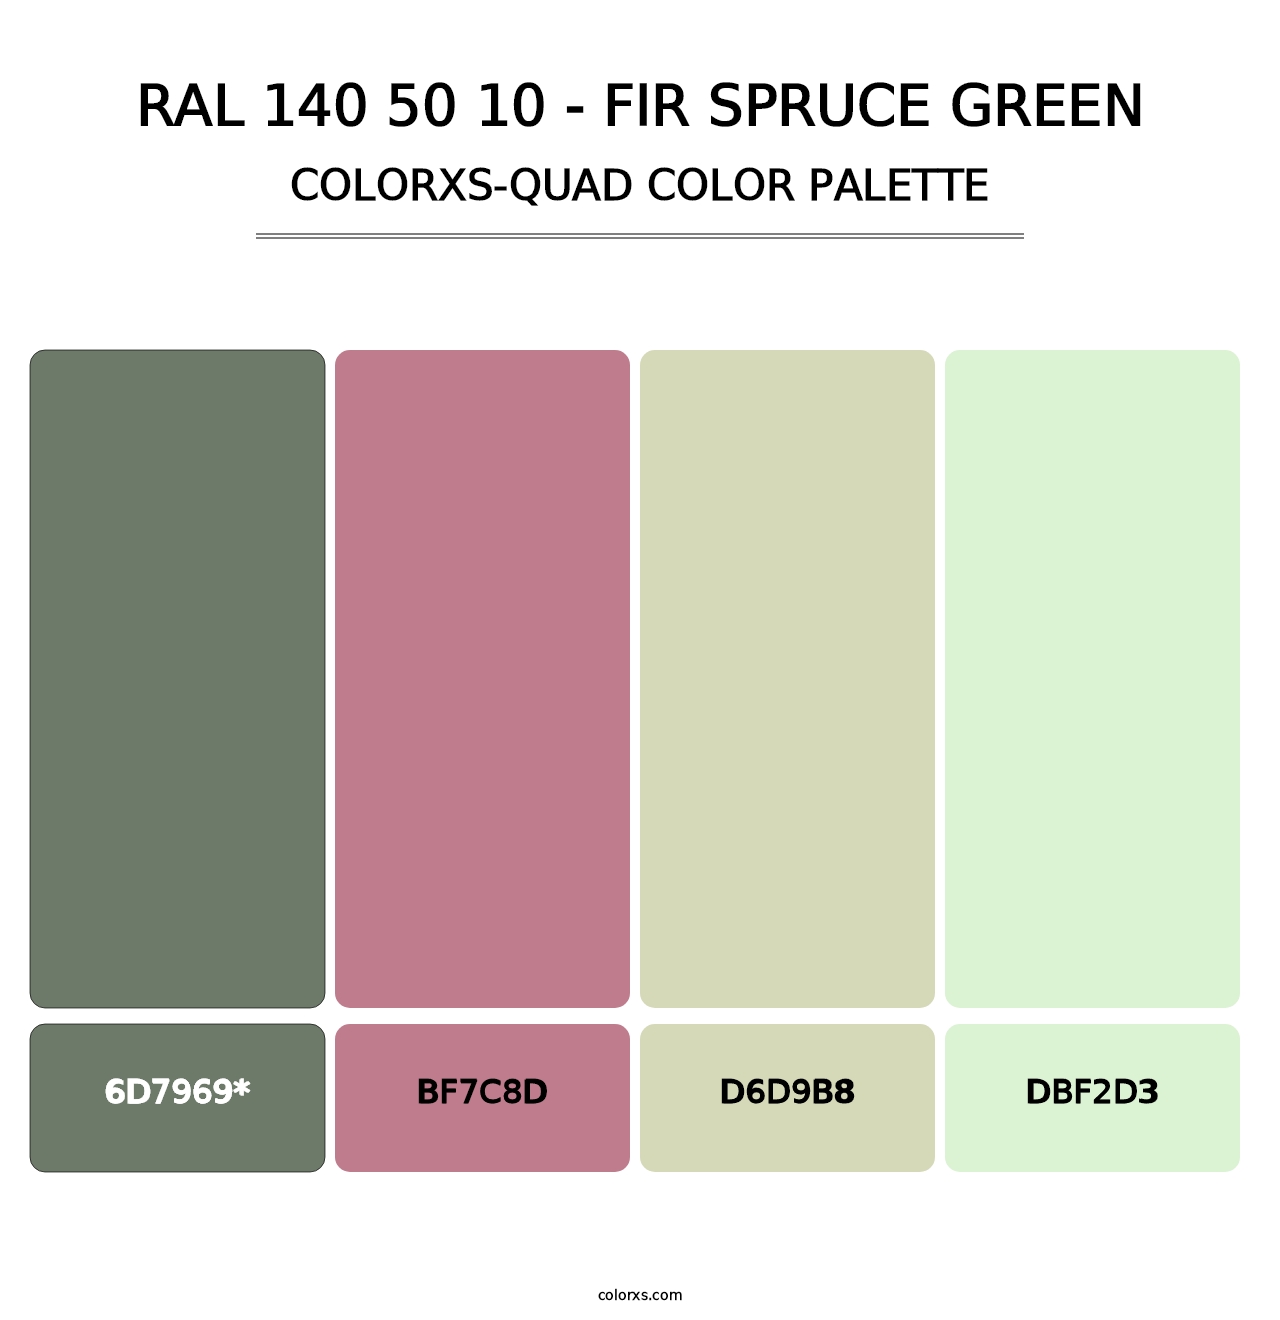 RAL 140 50 10 - Fir Spruce Green - Colorxs Quad Palette